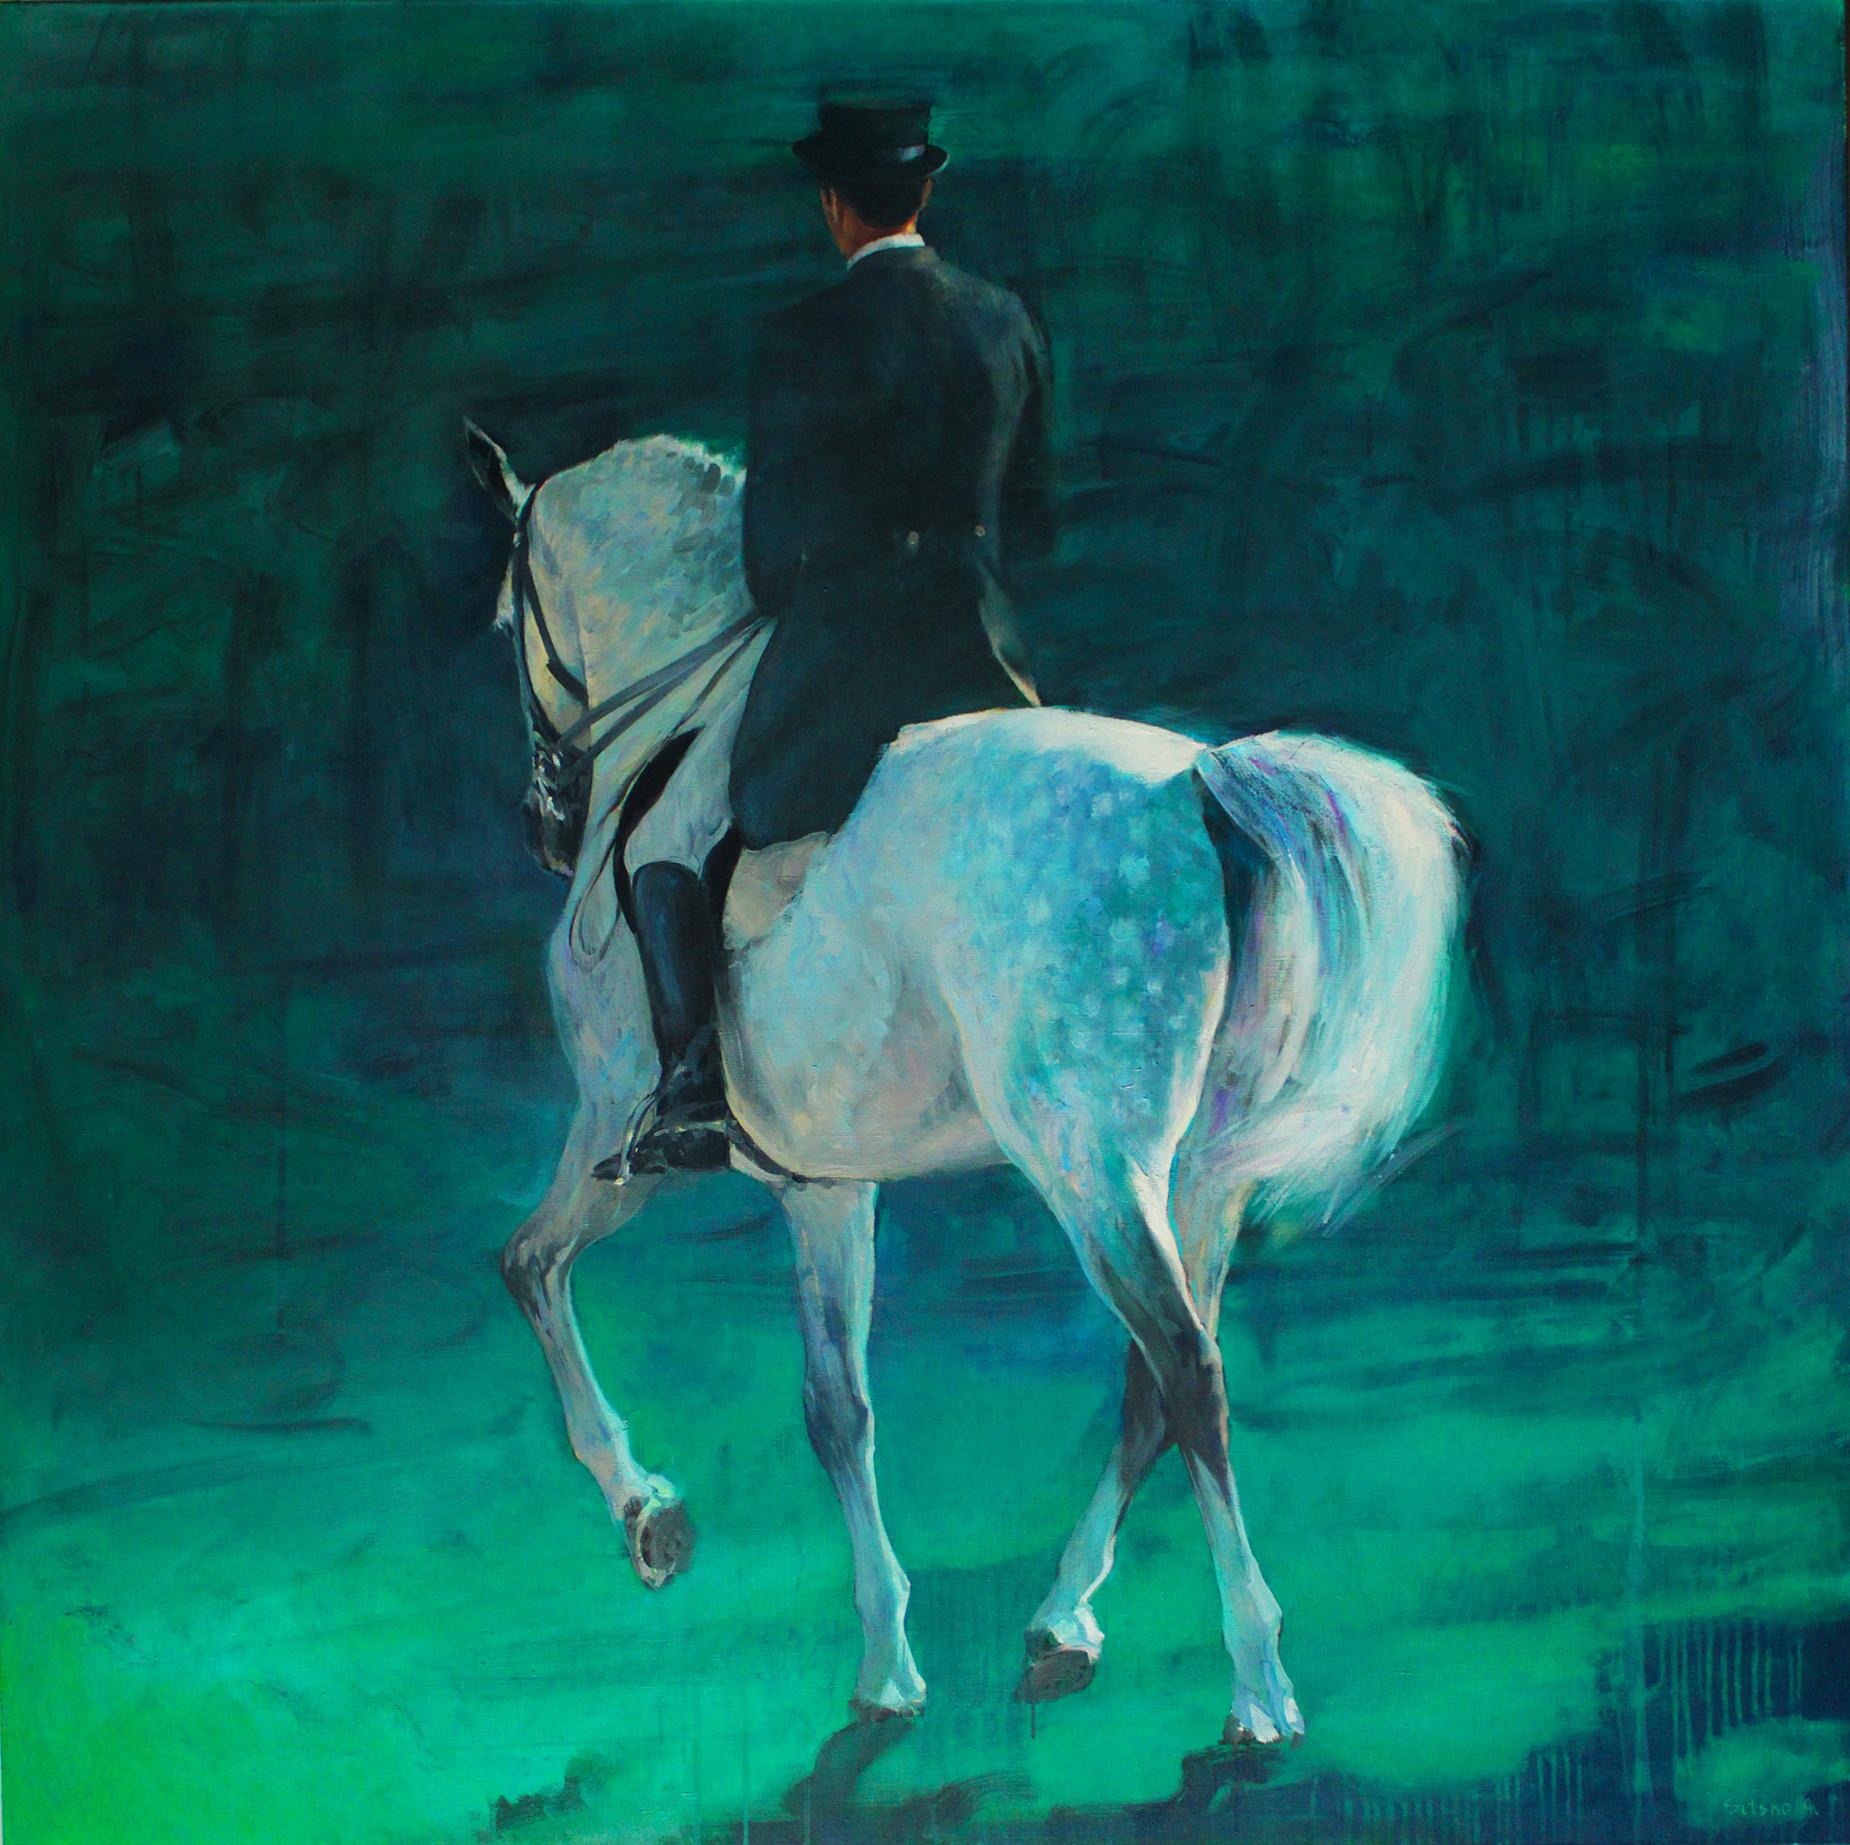  This painting is dedicated to courage, strength, and beauty. Man and horse, interaction, love. Powerful and restrained color.
• Linen canvas, high-quality oil paints. 
• Two coats of protective gloss varnish were applied to protect the painting